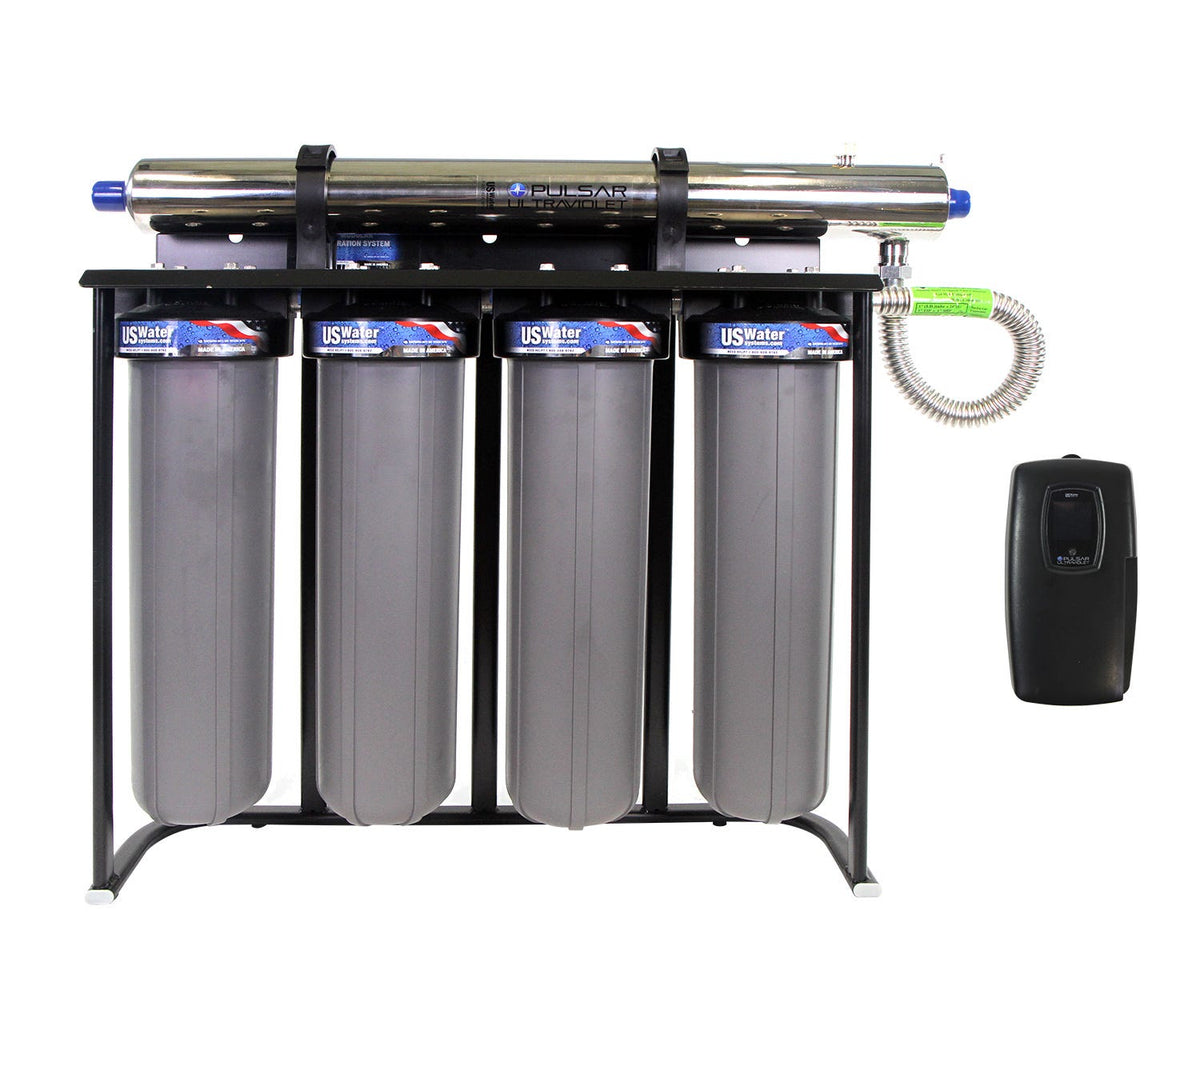 US Water Systems Pulsar Max Plus Ultraviolet Disinfection System | Up To 20 GPM